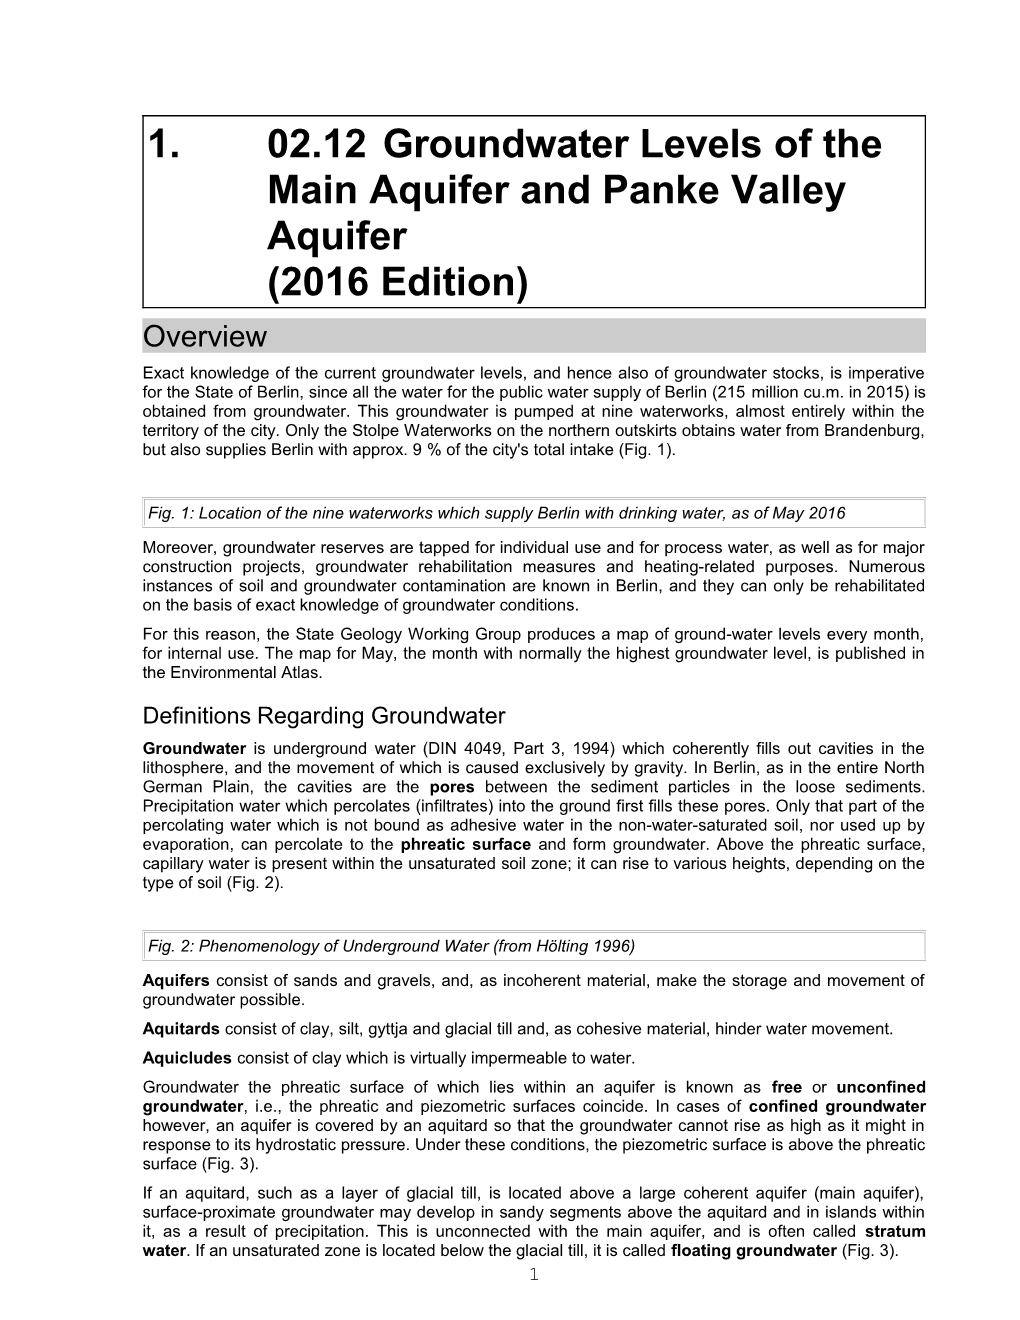 02.12 Groundwater Levels of the Main Aquifer and Panke Valley Aquifer (2016 Edition)